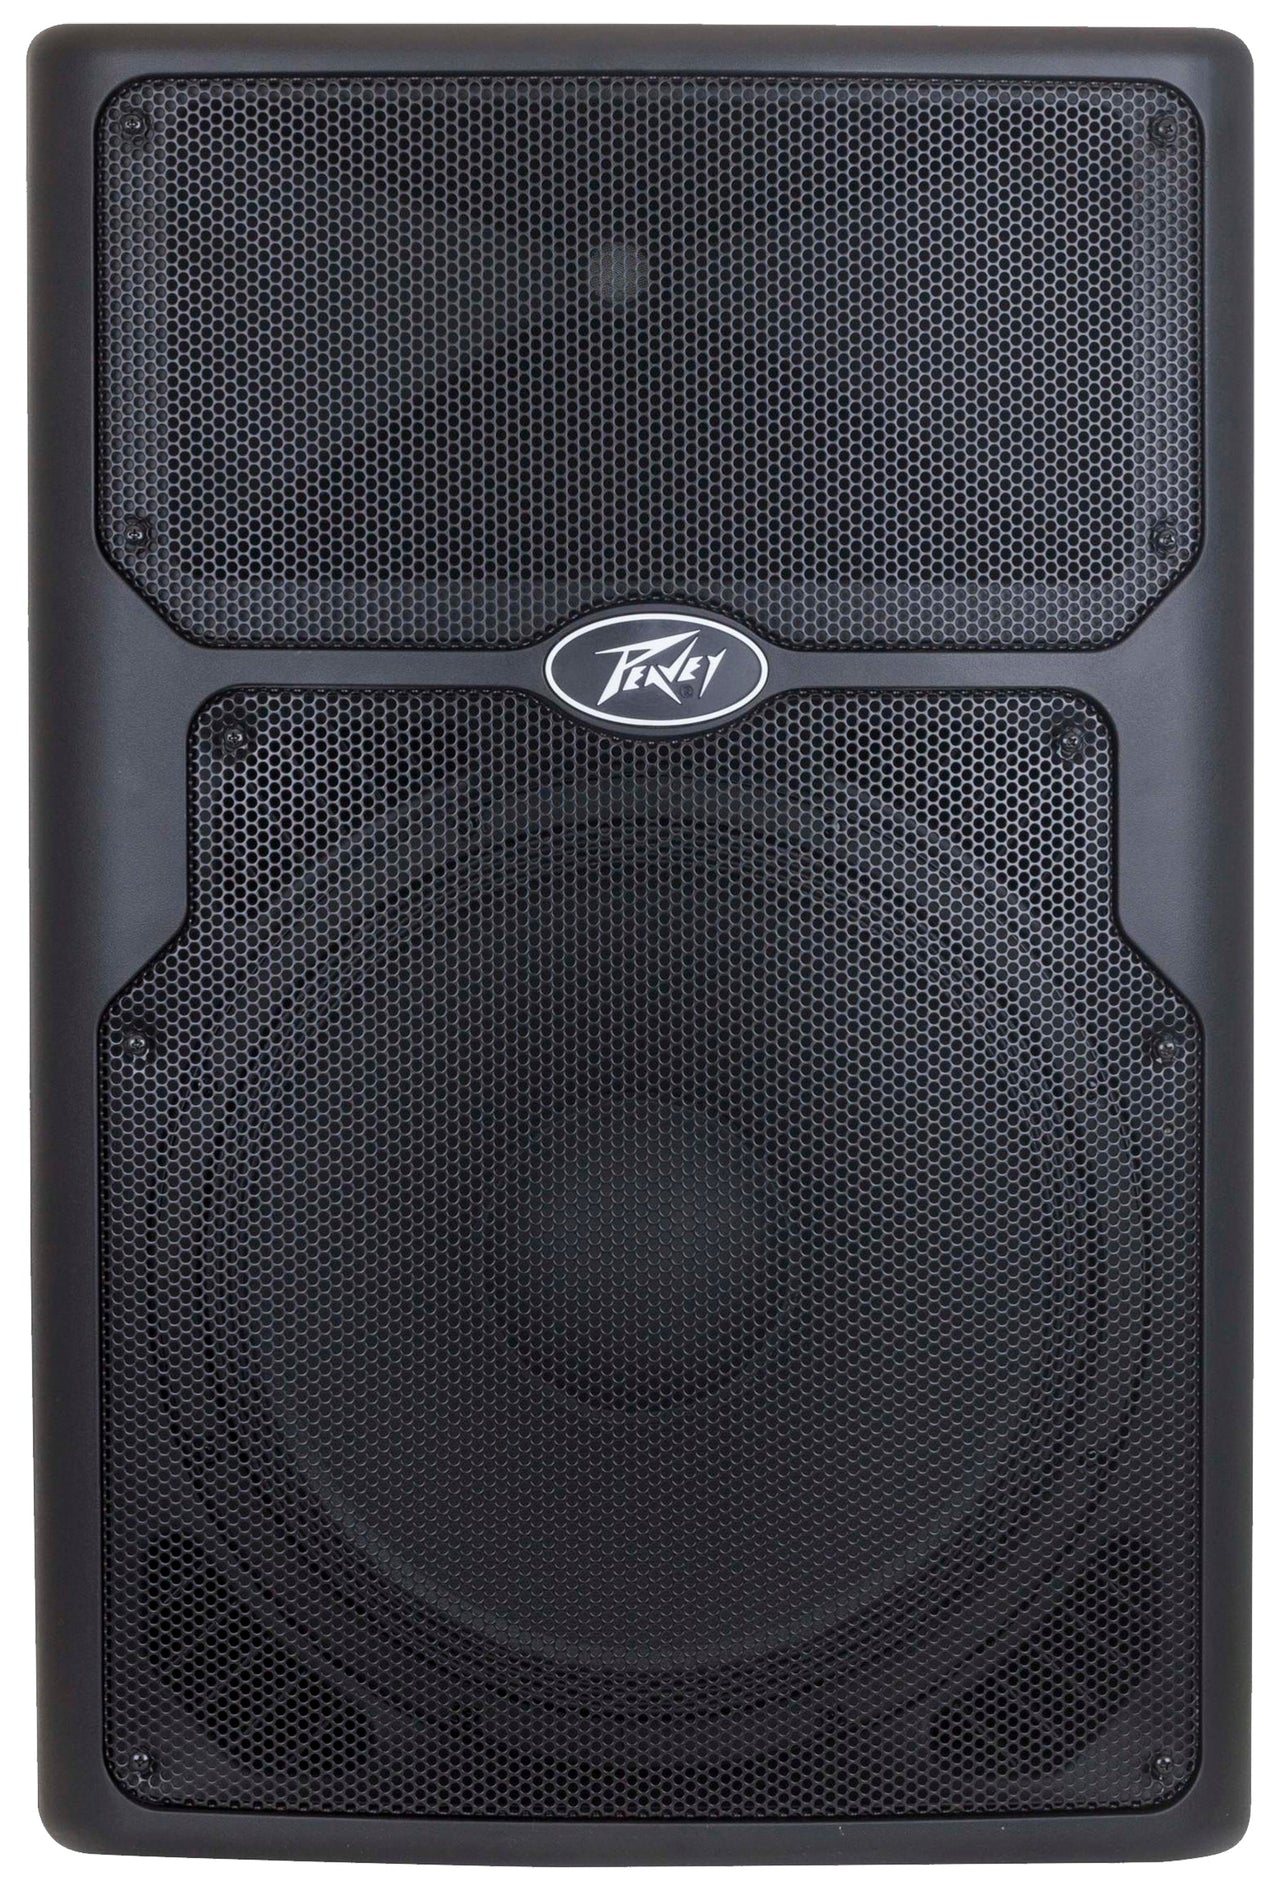 (2) PVXP15 DSP 15 inch Powered Speaker 830W 12" Powered Speaker with 1.4" Compression Driver,+ Free Mr. Dj Speaker Stands+XLR Cable